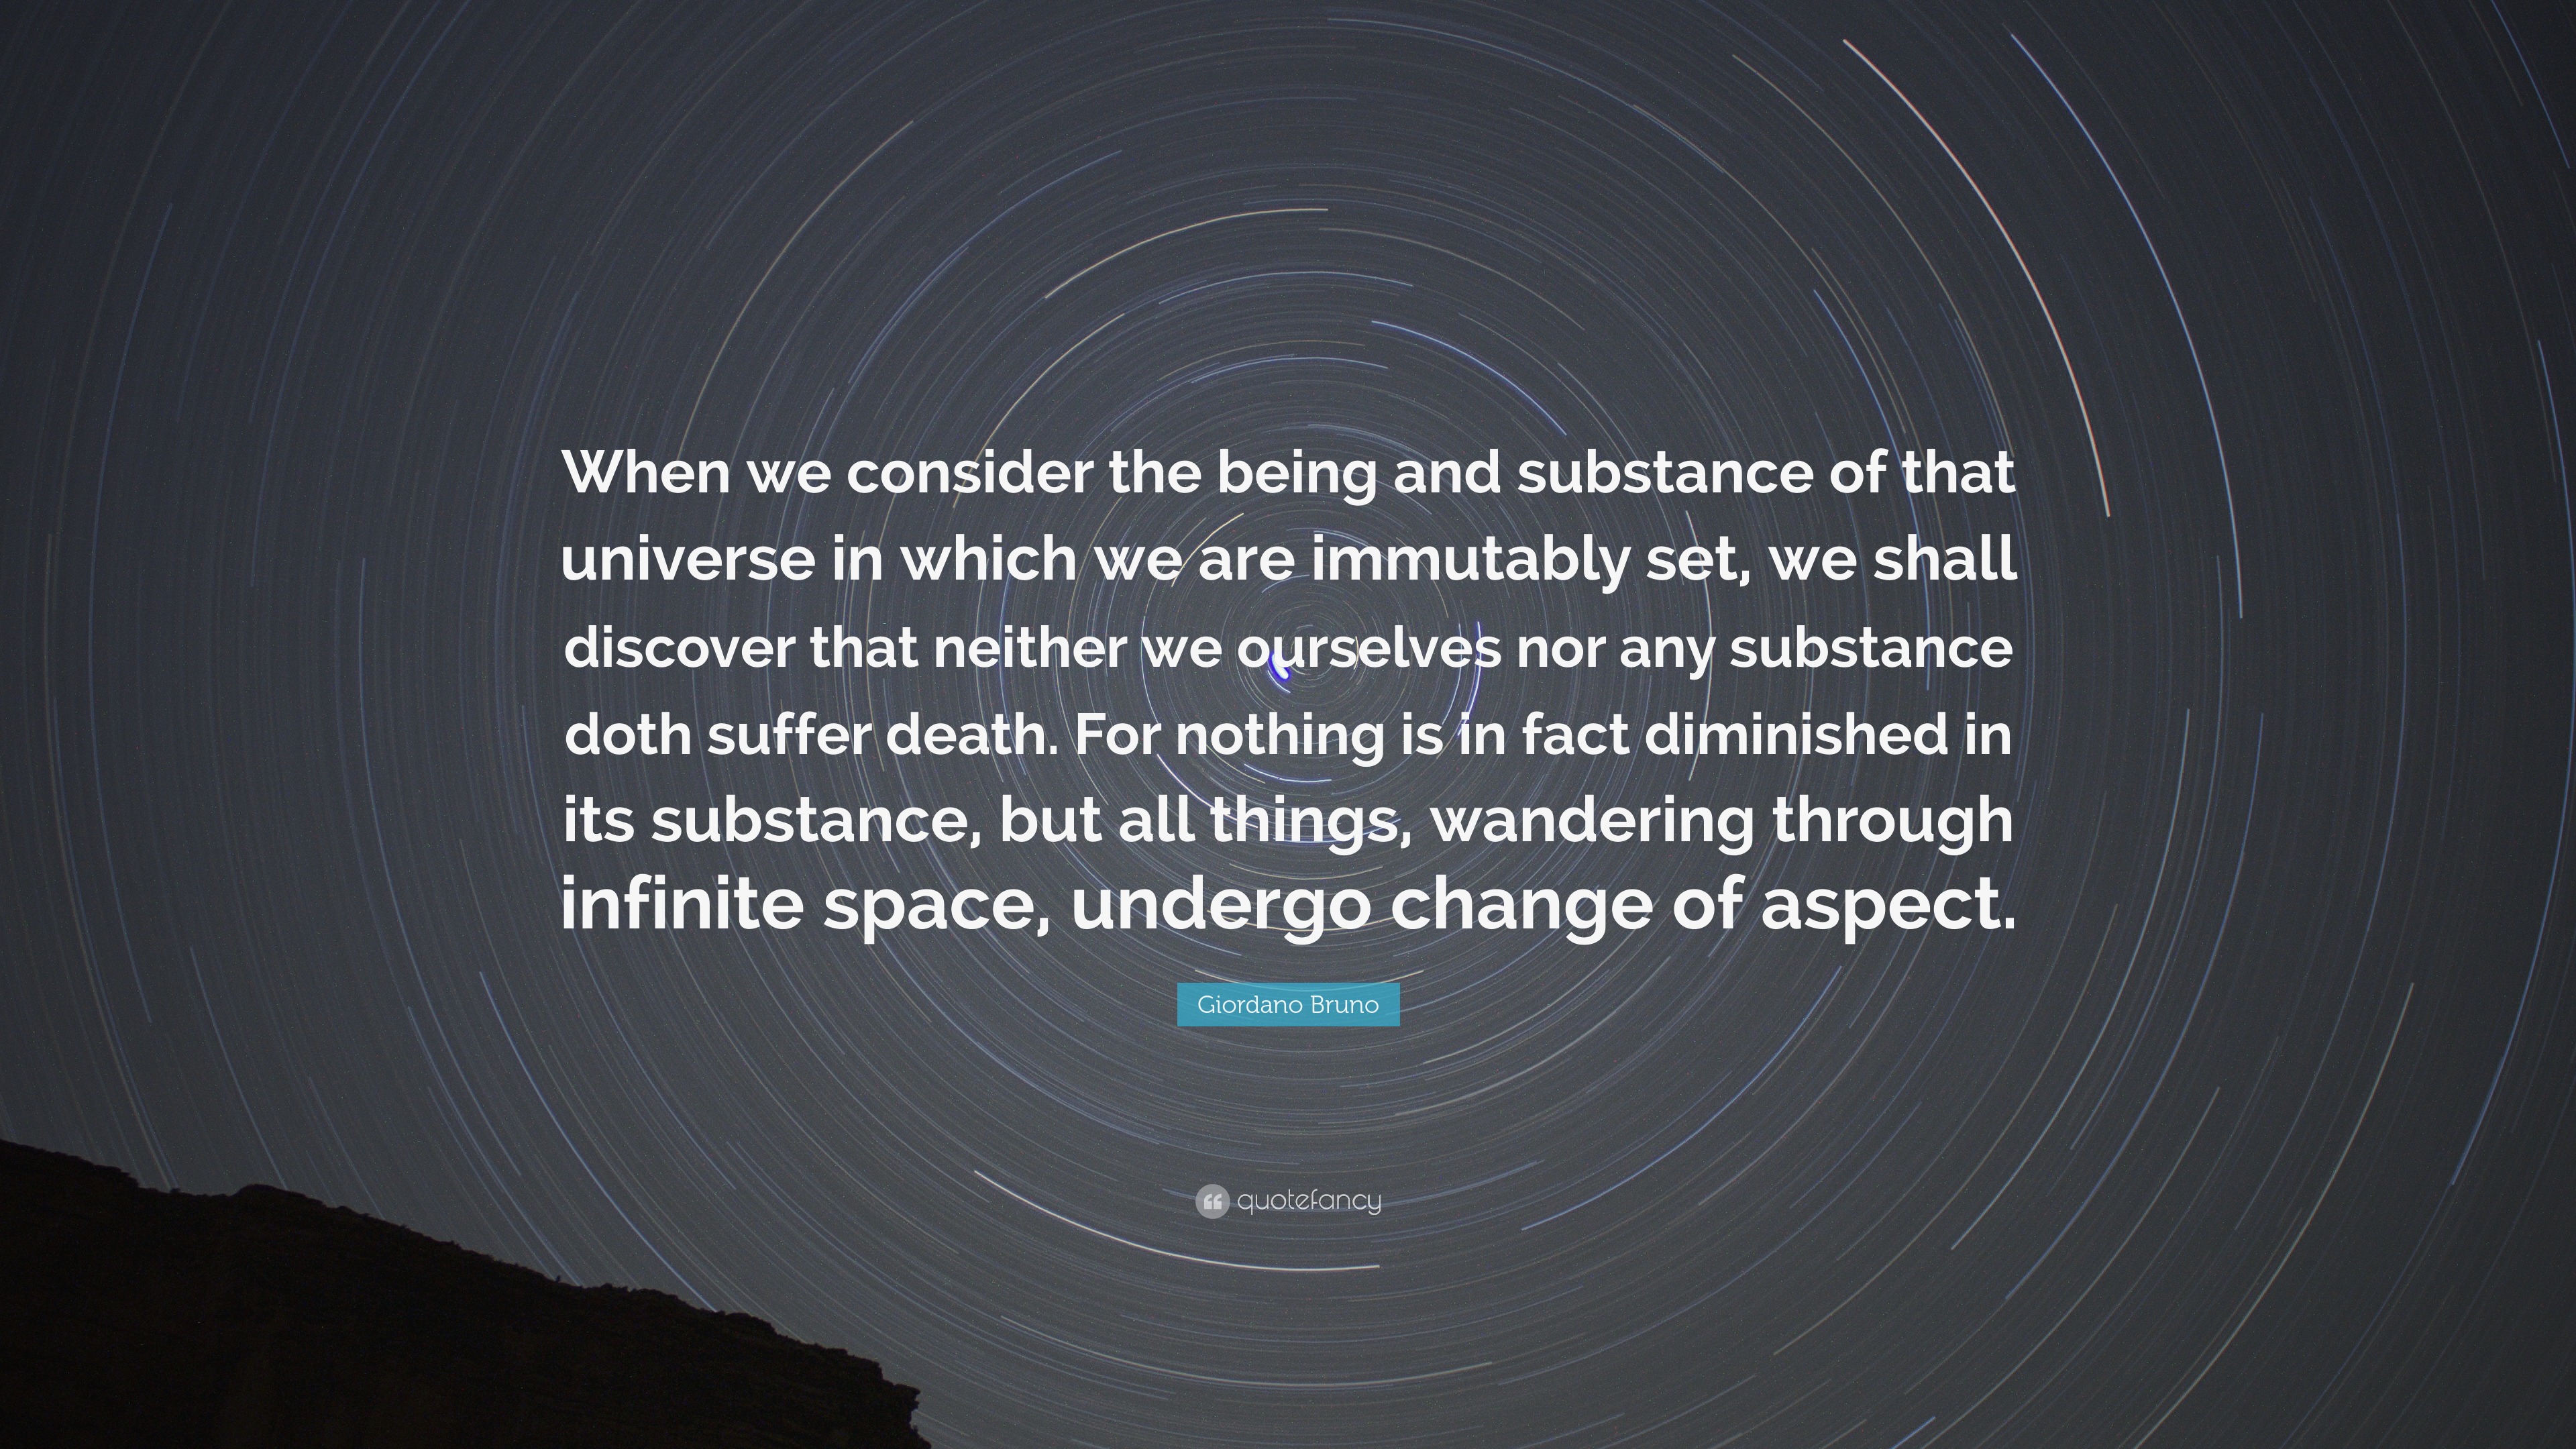 Giordano Bruno Quote: “When we consider the being and substance of that ...